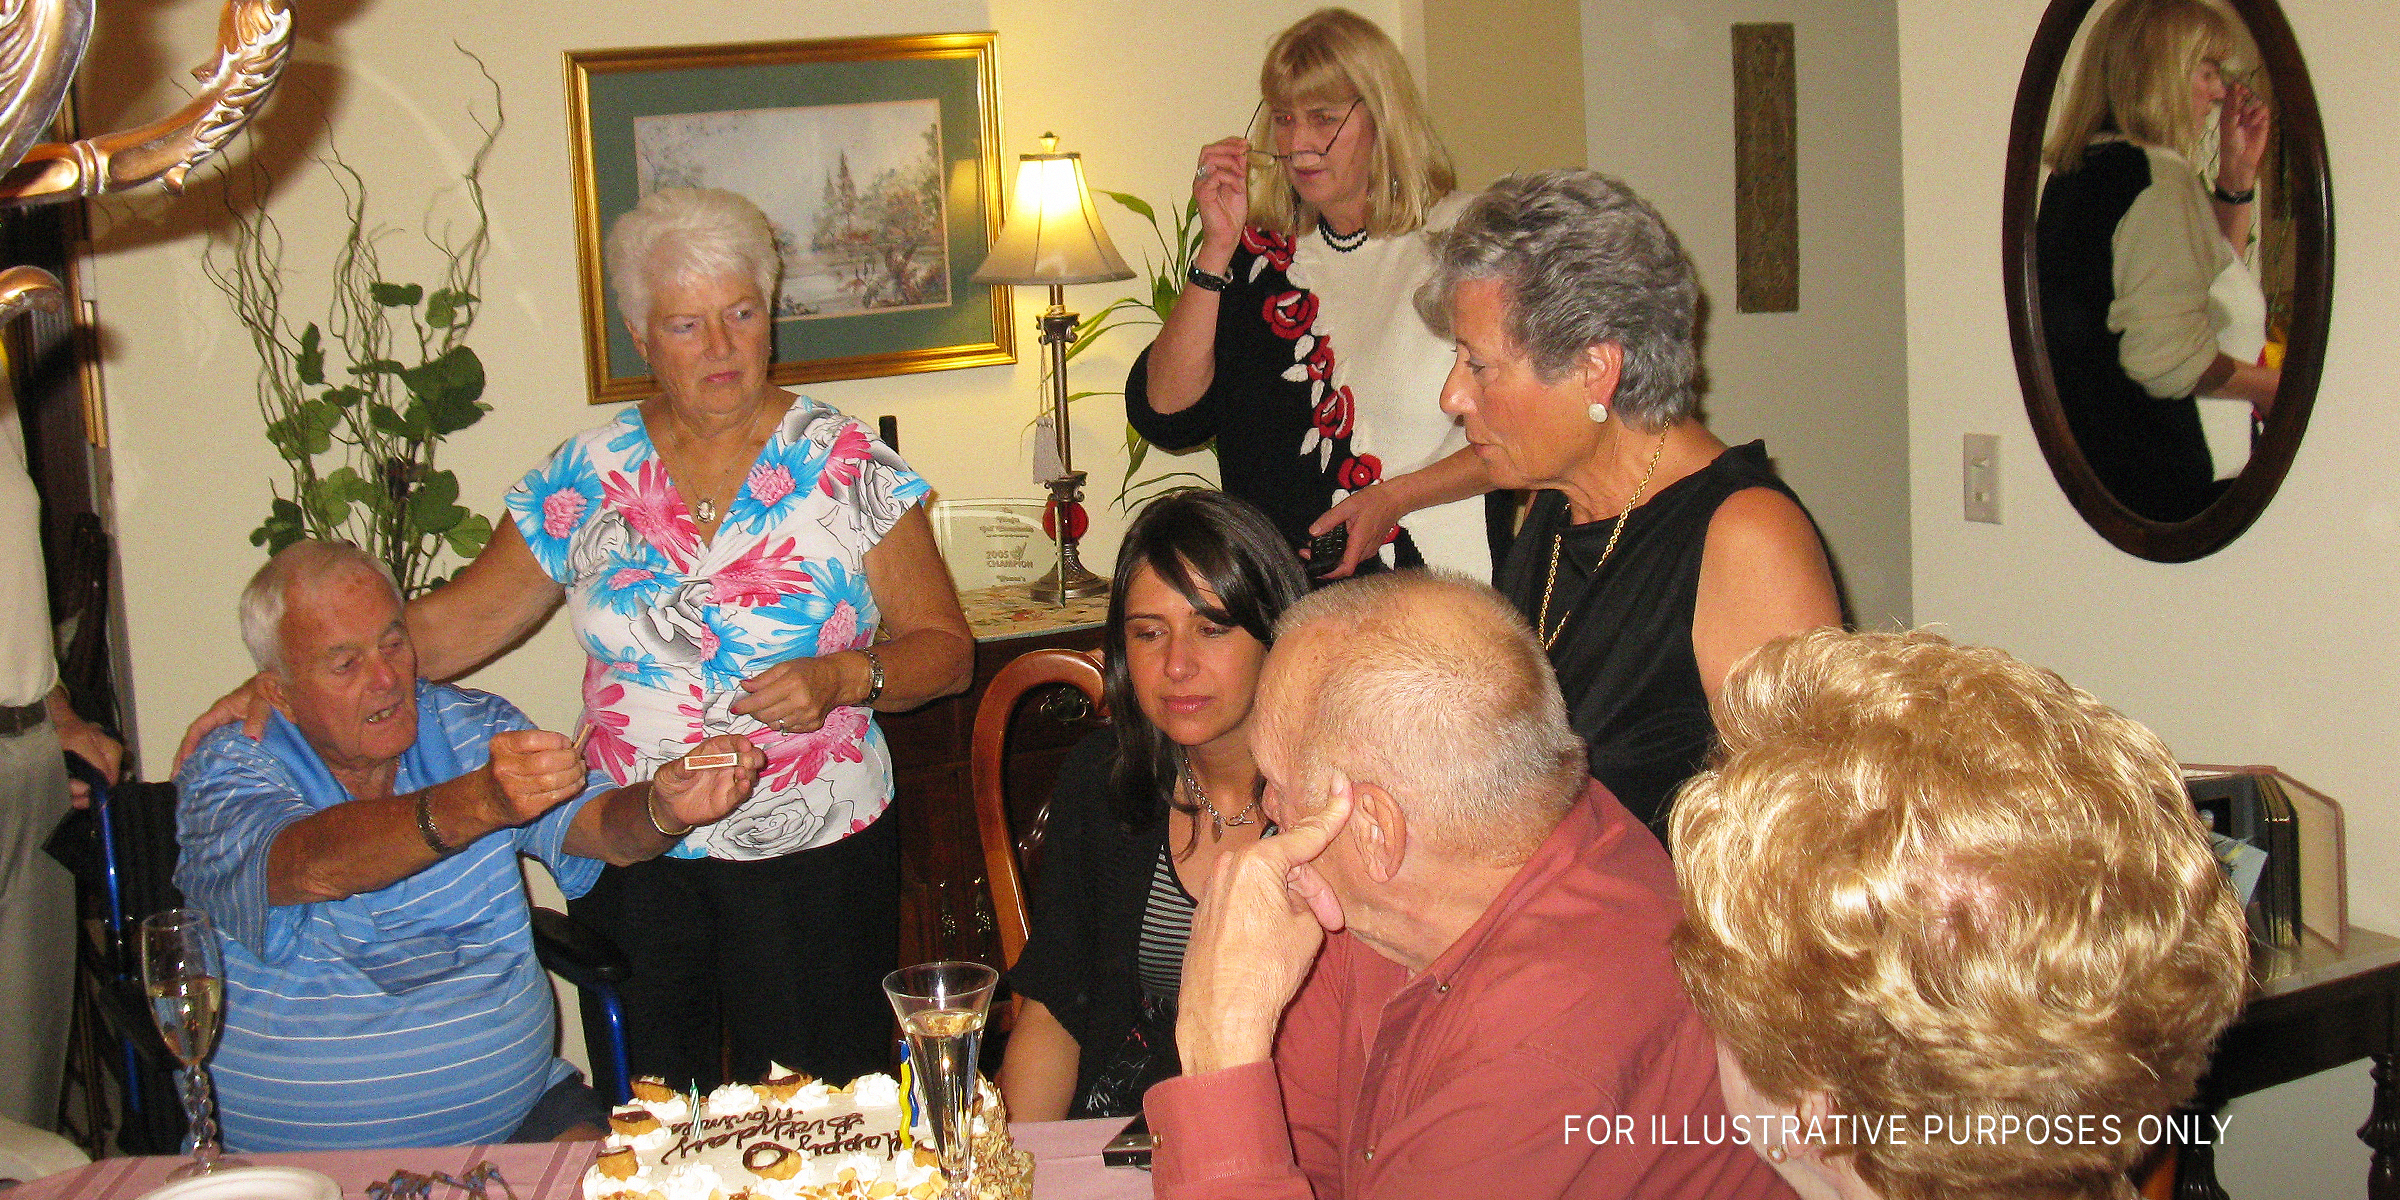 Family and friends at a birthday party | Source: Flickr.com/(CC BY 2.0) by Stevie Rocco